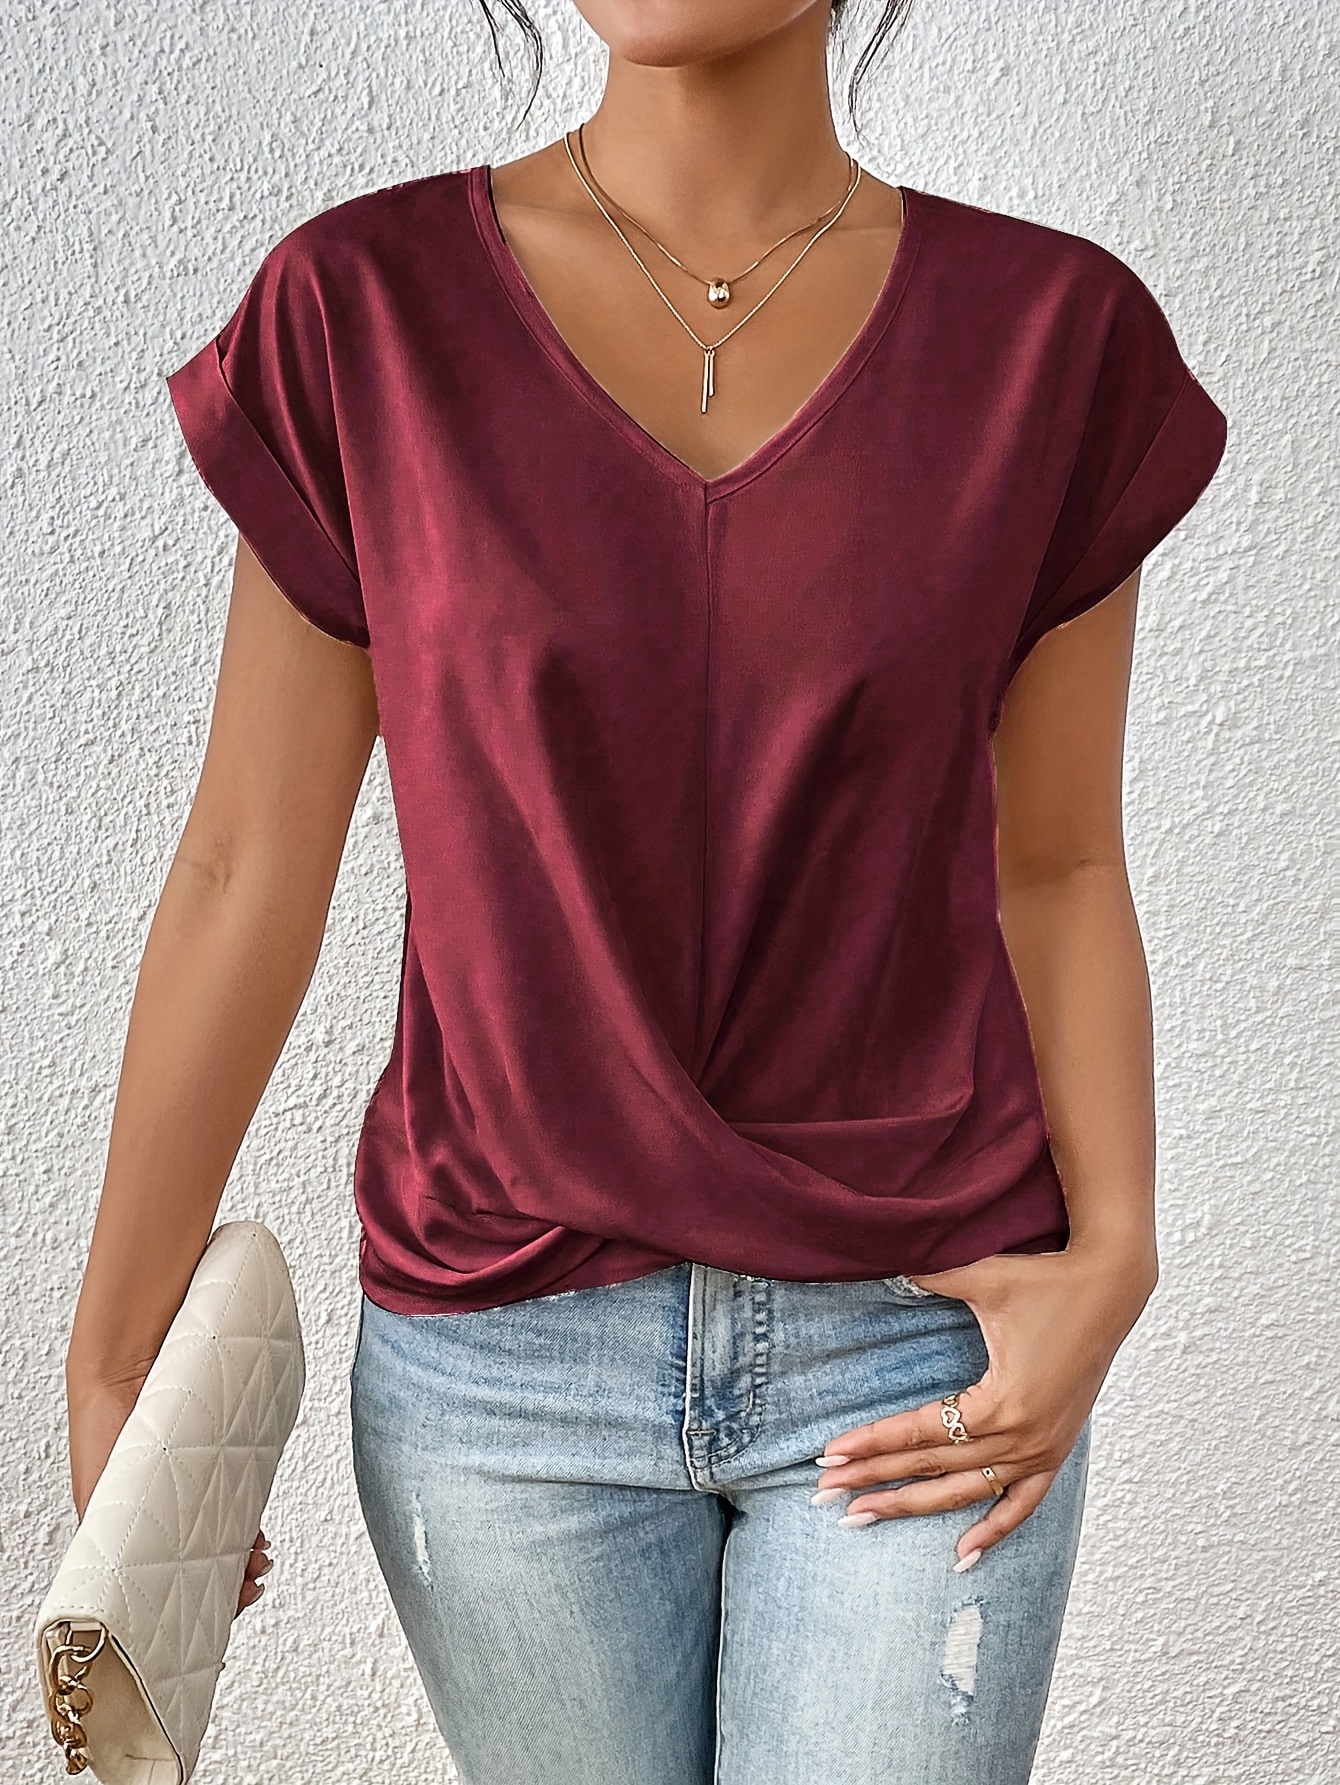 Women's Red Tops- Shirts, Blouses and Tees - Express